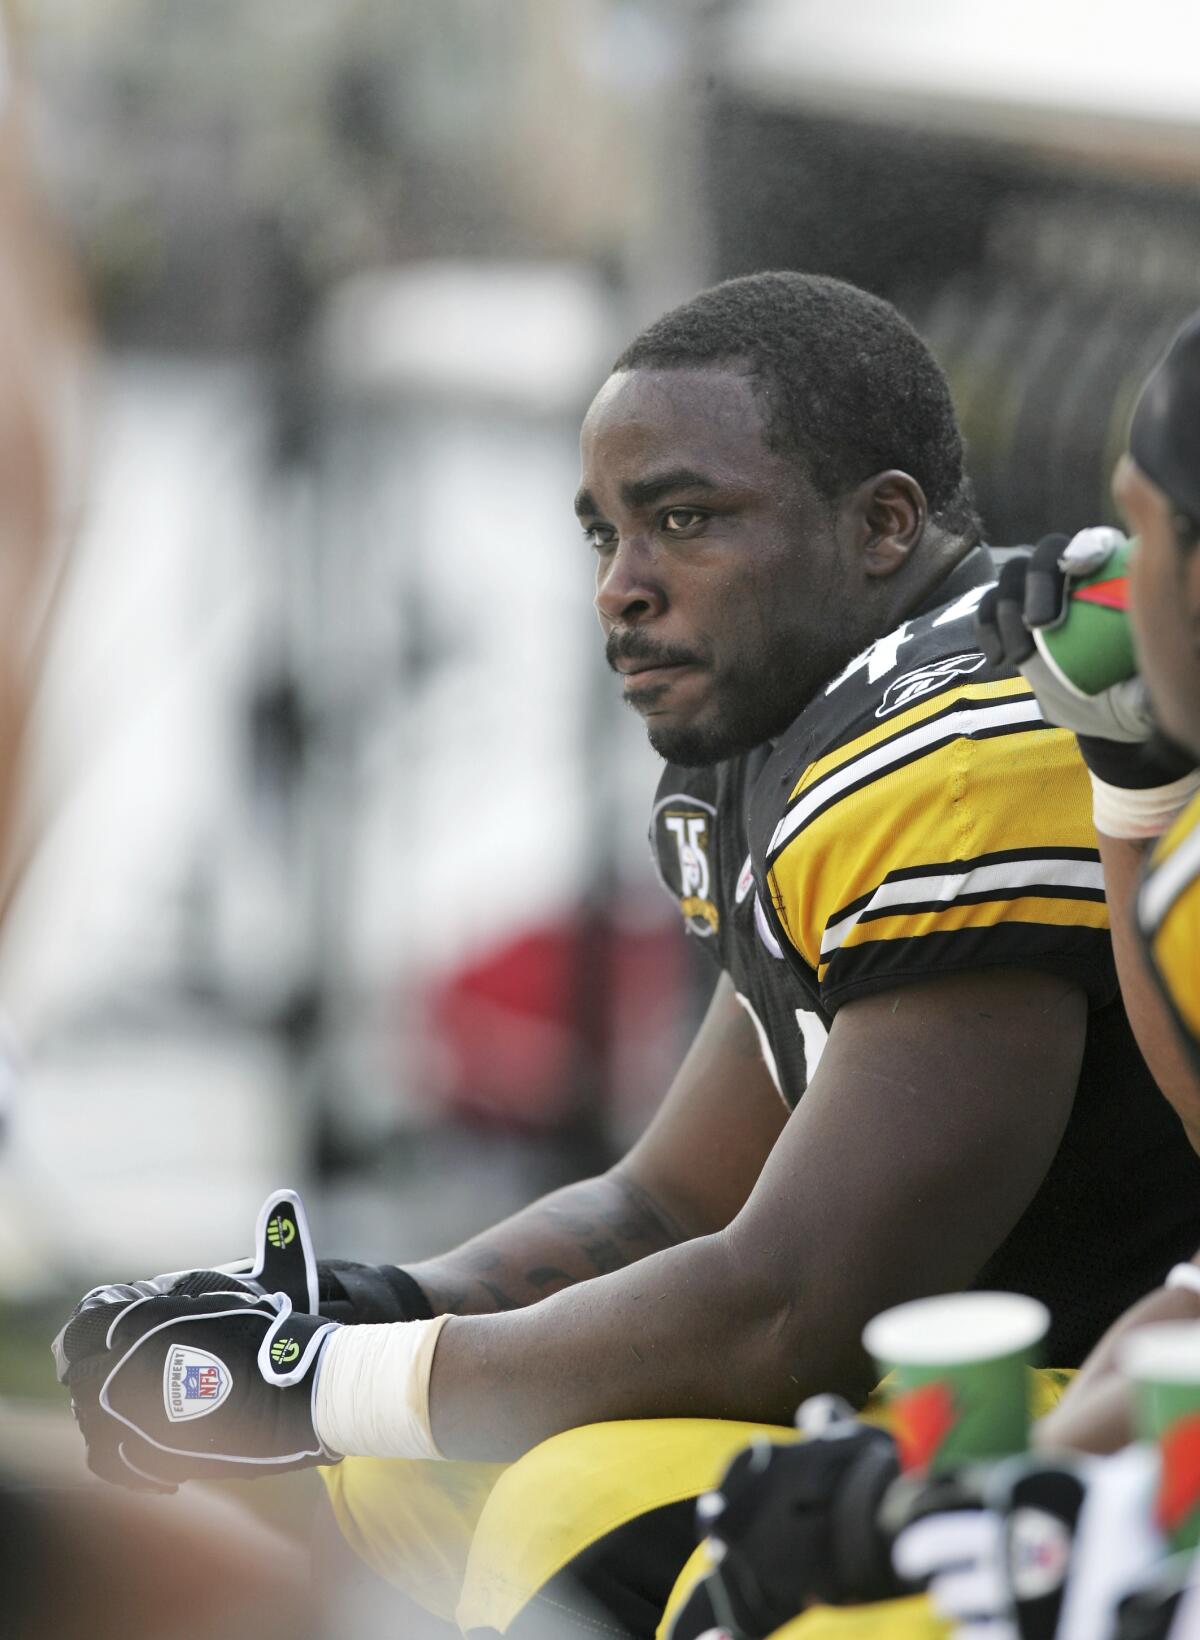 FILE - Pittsburgh Steelers running back Najeh Davenport (44) sits on the bench during an NFL football game against the Seattle Seahawks in Pittsburgh, in this Sunday, Oct. 7, 2007, file photo. A federal judge on Monday, March 8, 2021, dismissed a lawsuit that challenged “race-norming” in dementia tests for retired NFL players, a practice that some say makes it harder for Black athletes to show injury and qualify for awards. Davenport was denied an award but would have qualified had they been white, according to their lawsuit. (AP Photo/Keith Srakocic, File)